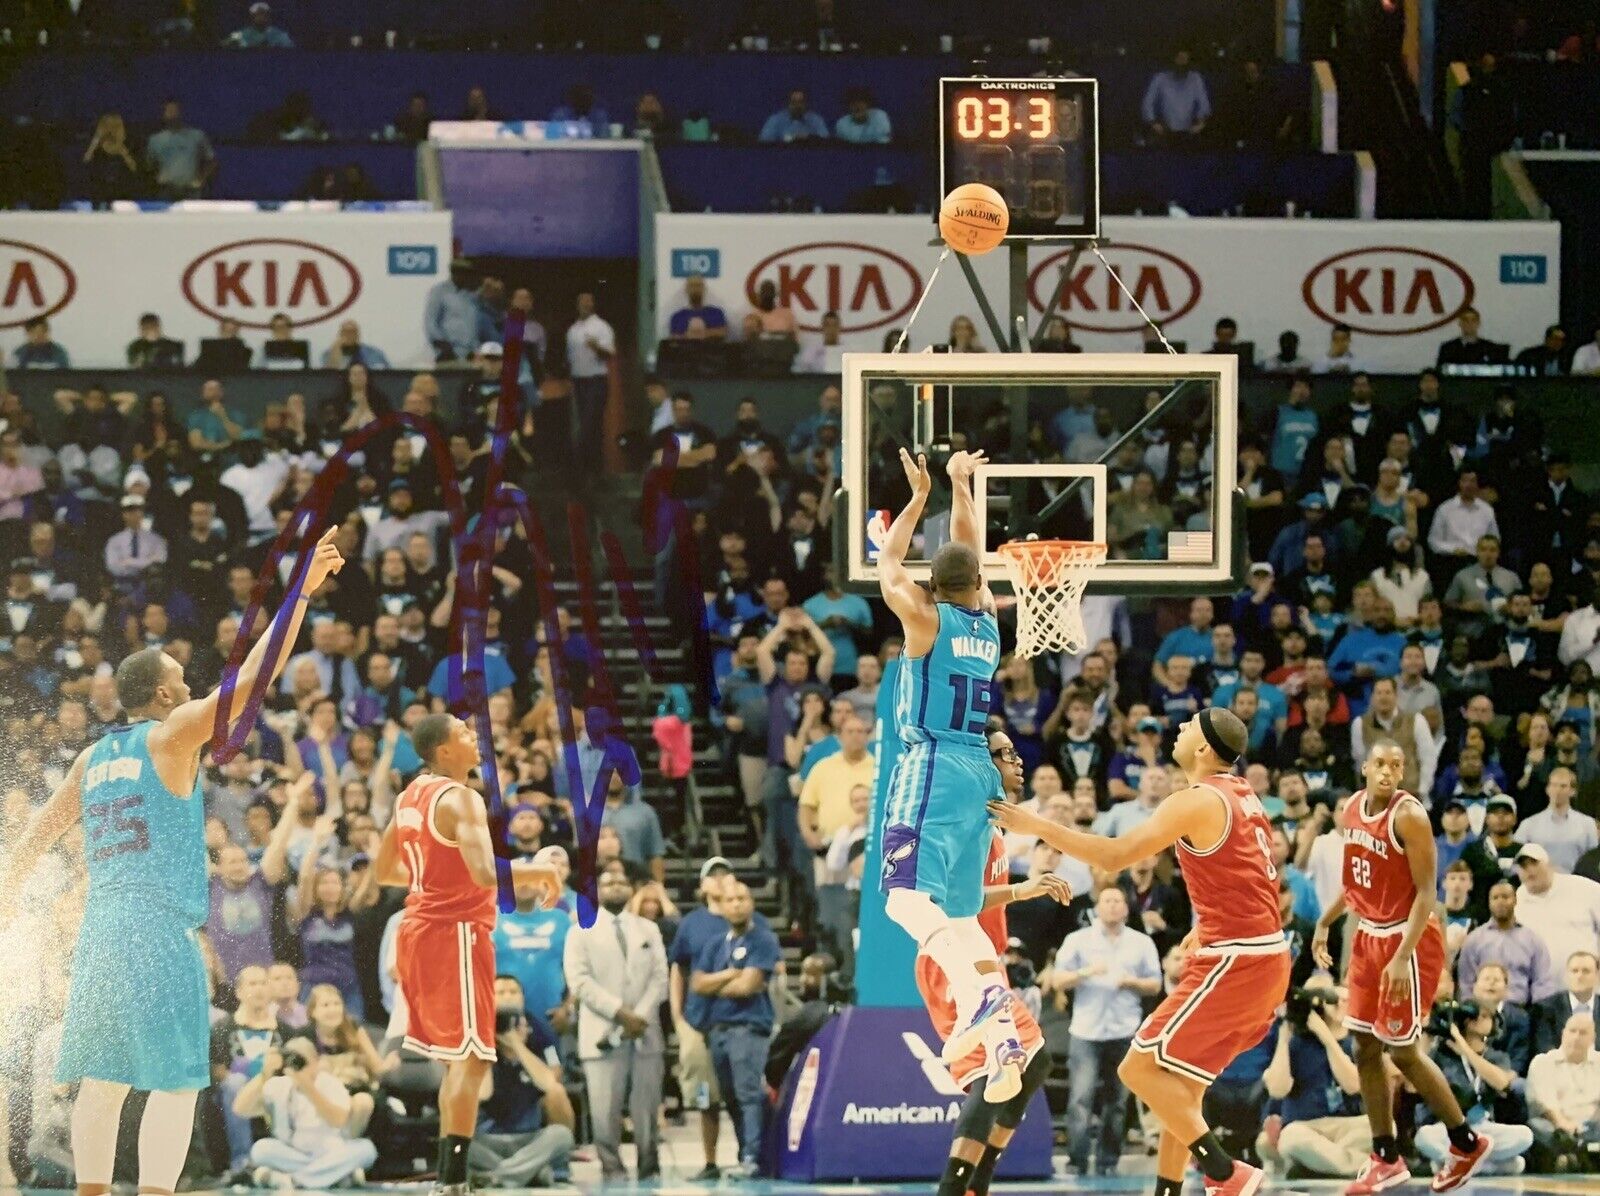 kemba walker Signed Auto 8x10 Photo Poster painting Pic